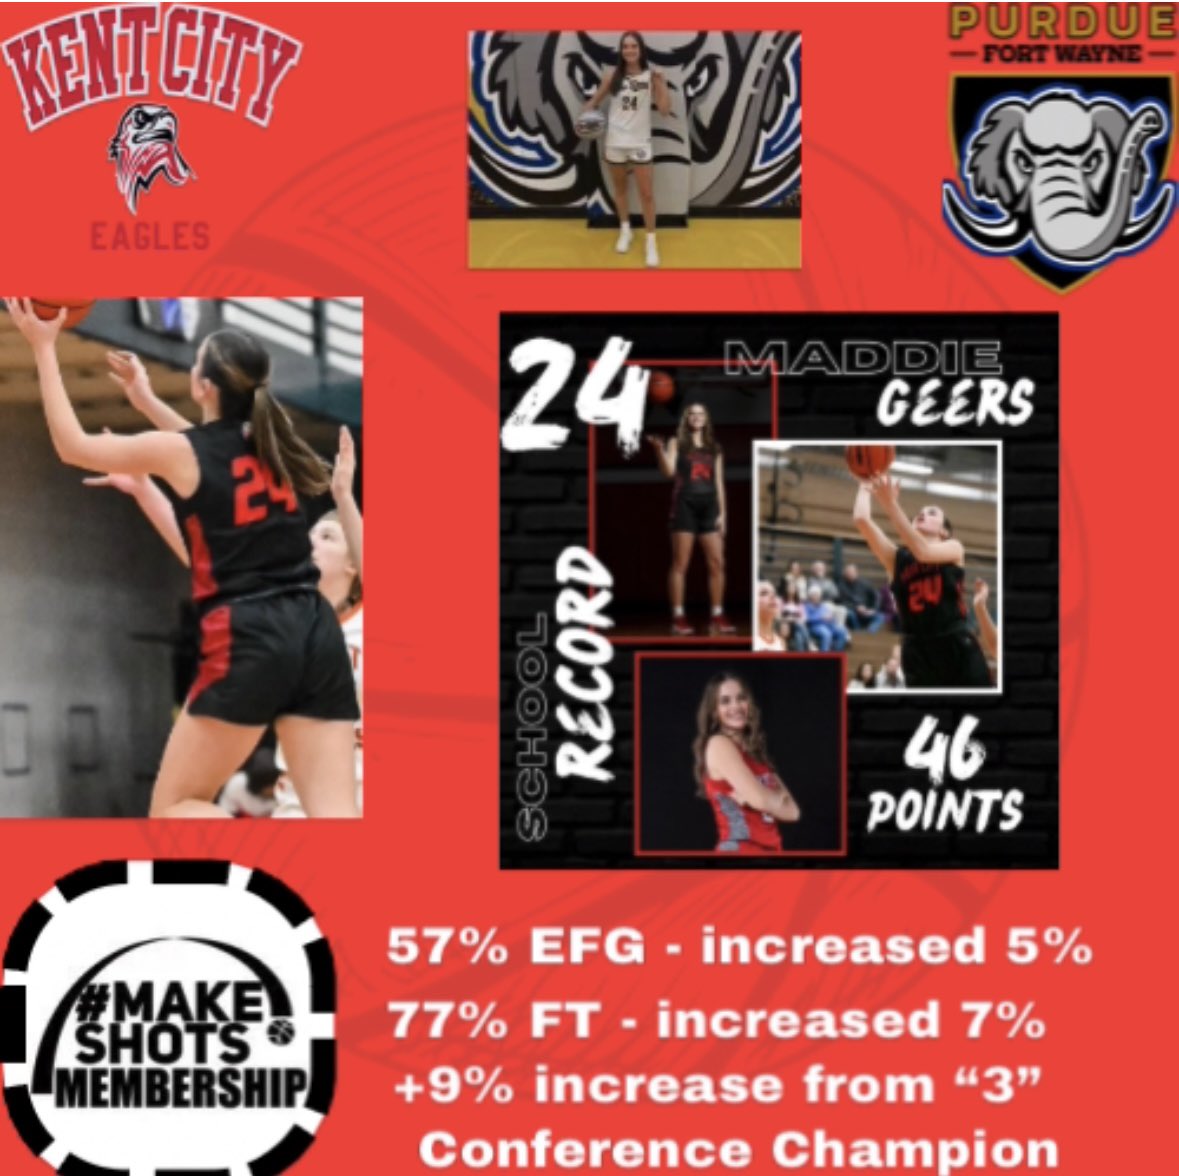 It’s great if a player can improve their shooting % in 1 area. When they do it in all 3 areas, it shows the time + work that player put in to improve. @KCGirlsHoops @MastodonWBB @GeersMadelyn did that! The resume of a shooting coach is in numbers, especially growth #MakeShots